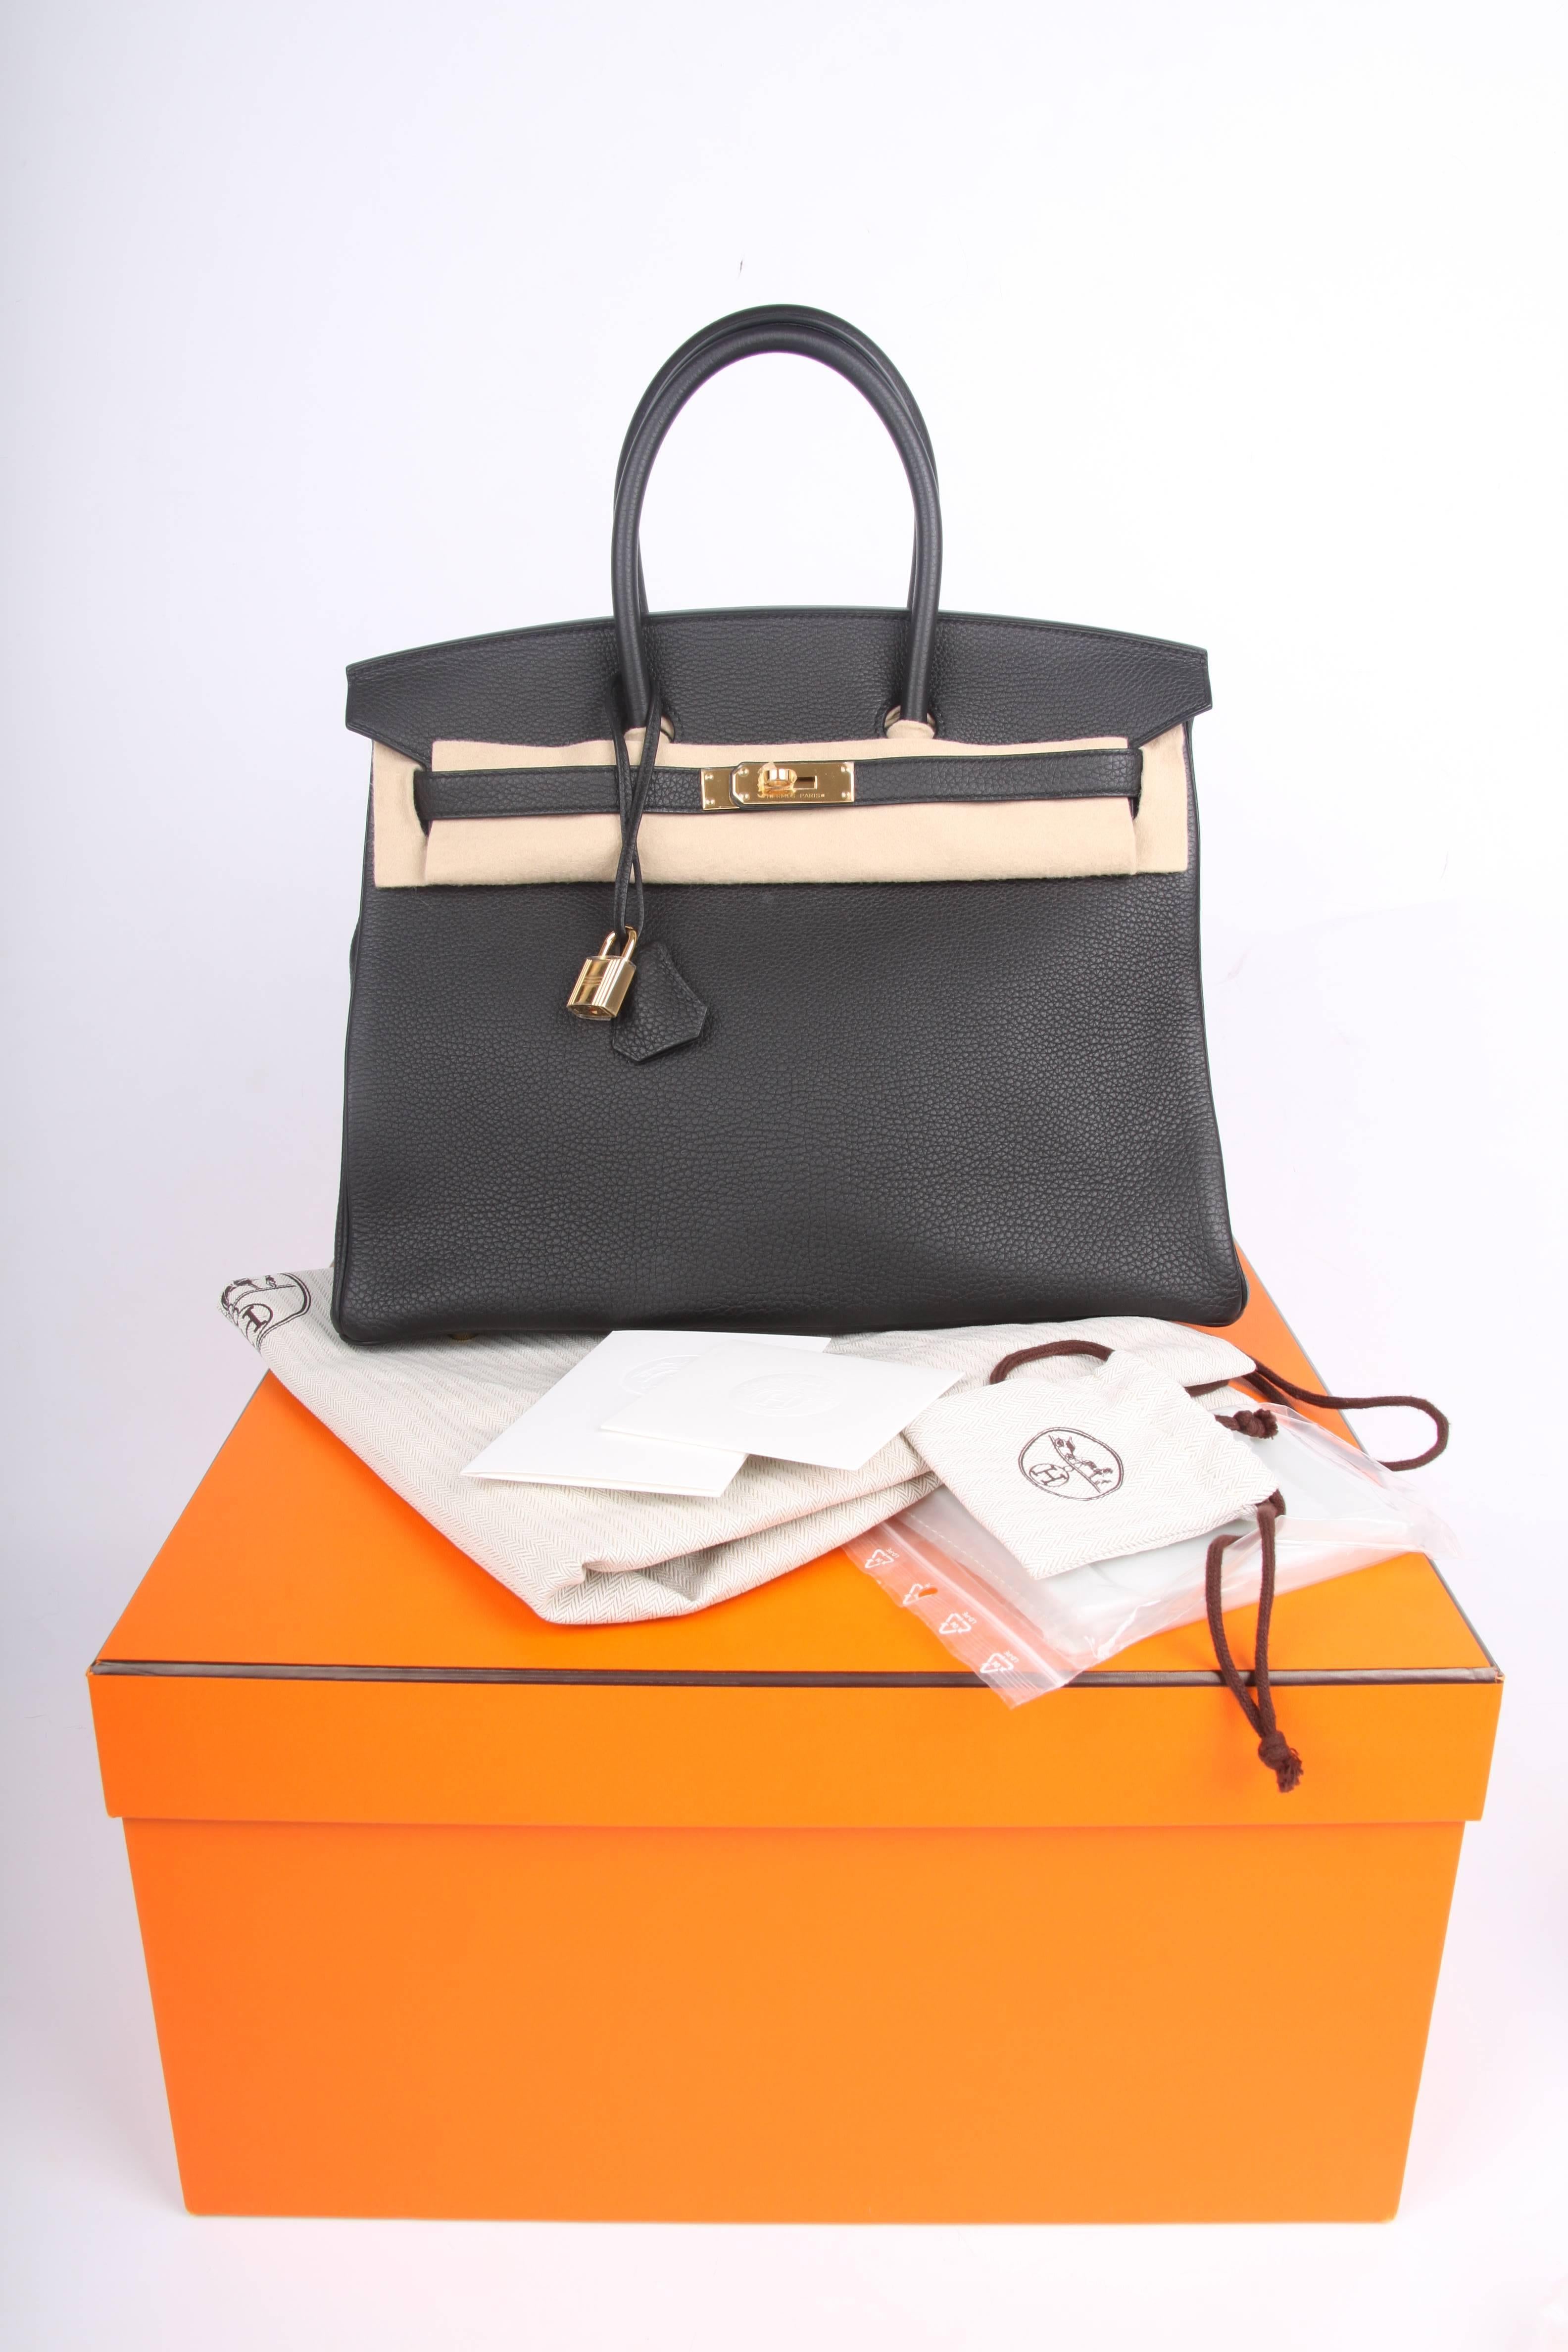 Brand new is this Hermès Birkin Bag 35 in Togo leather with goldtone hardware, this color is Noir. It's as black as the night!

Front toggle closure, clochette with lock and two keys, and double rolled handles. The Togo leather has a visible grain,